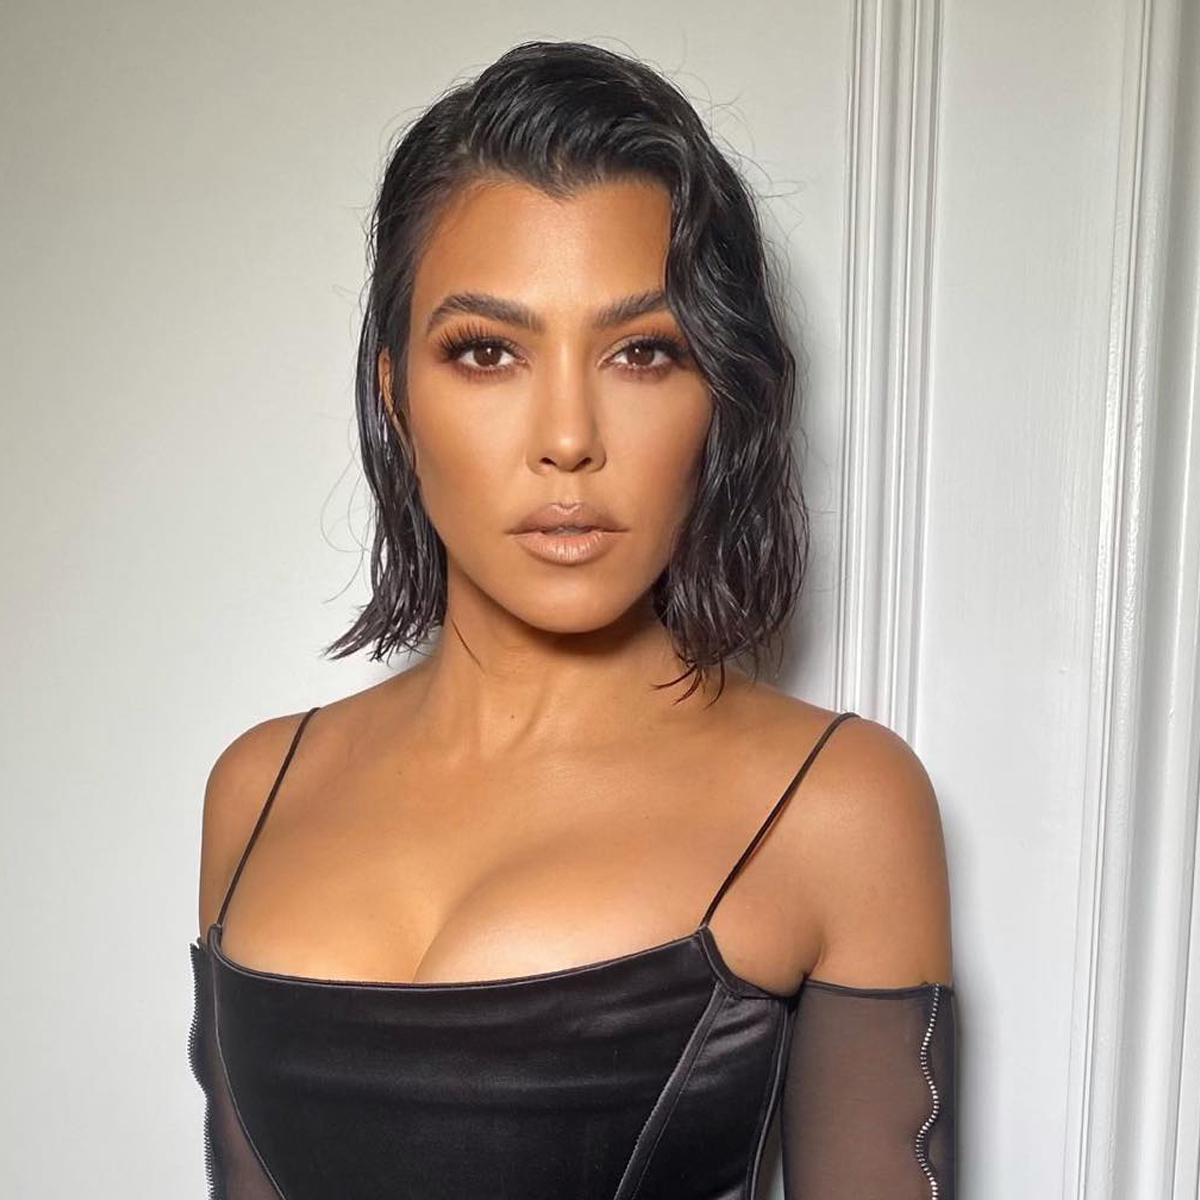 Kourtney Kardashian’s Naked Dress Is Her Most Unconventional Look Yet